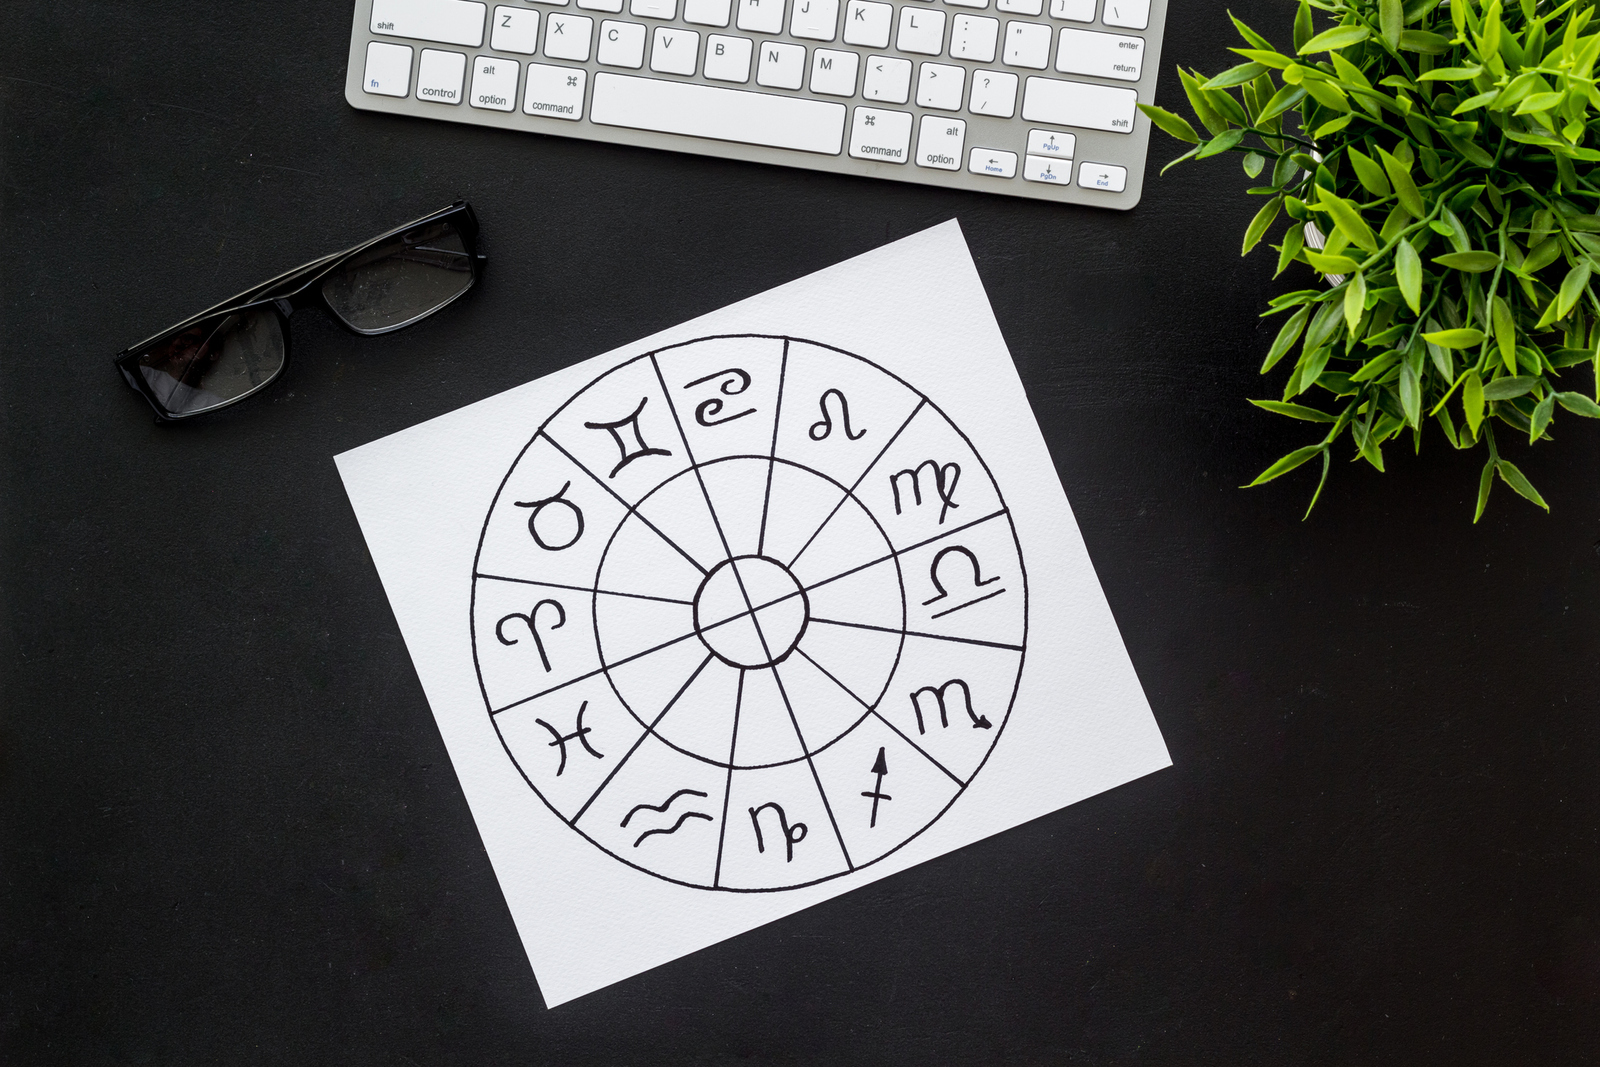 The 12 signs of the Zodiac on a blank sheet of paper